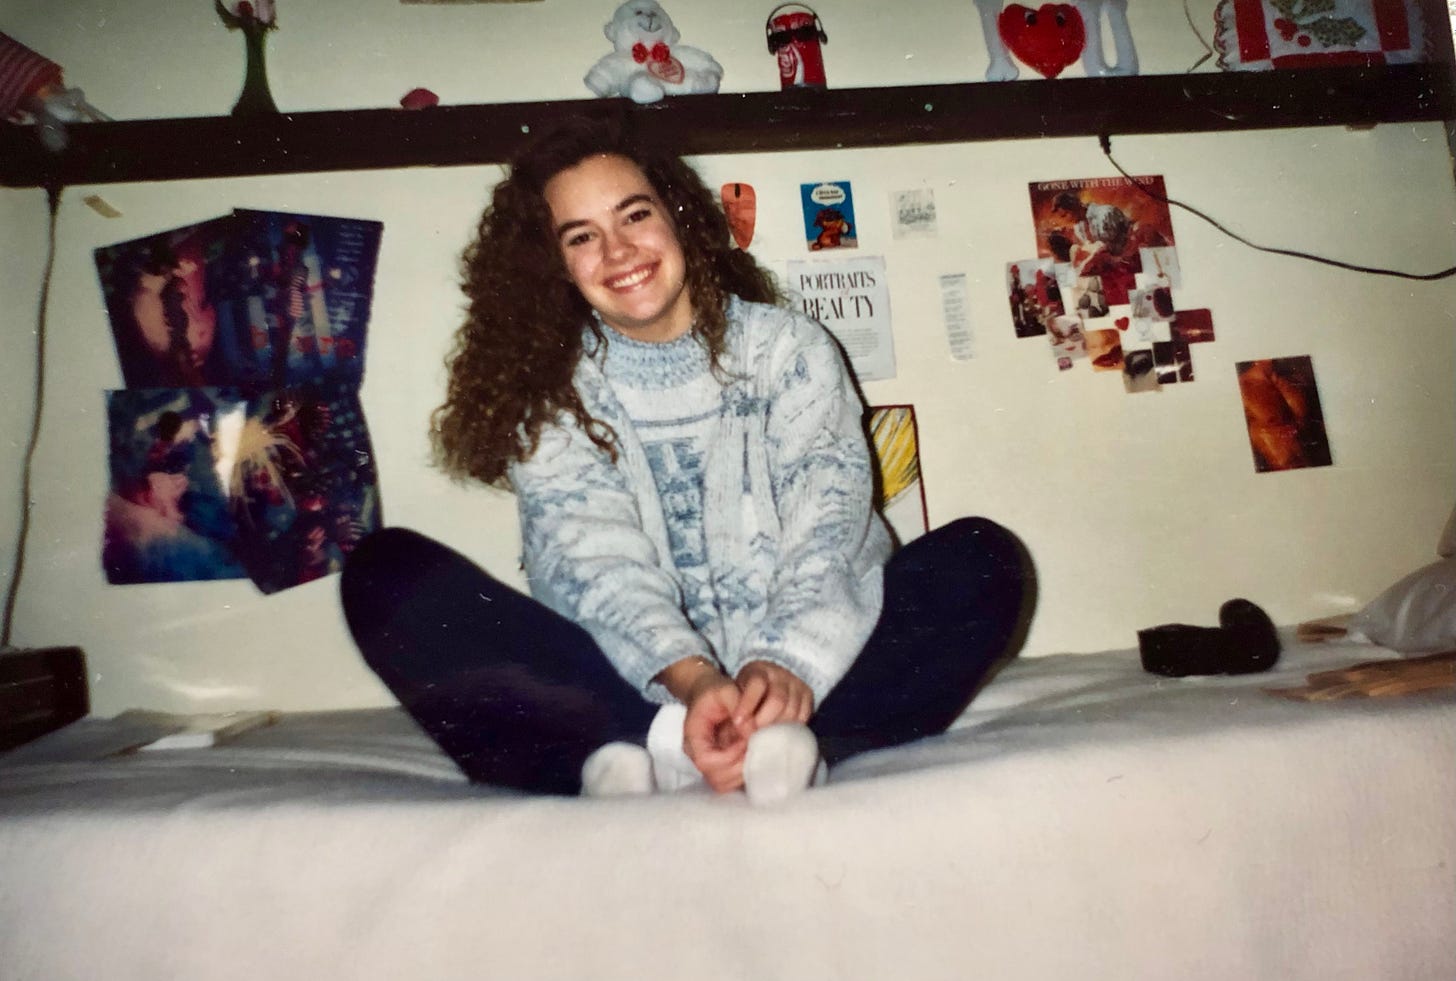 The author with long early-90s perm, sitting on her bed before a collection of wall collages and a shelf full of reminders of her childhood home. A quilted holly leaf from mom, a dancing Coke can with shades, a blow-up I love you heart...